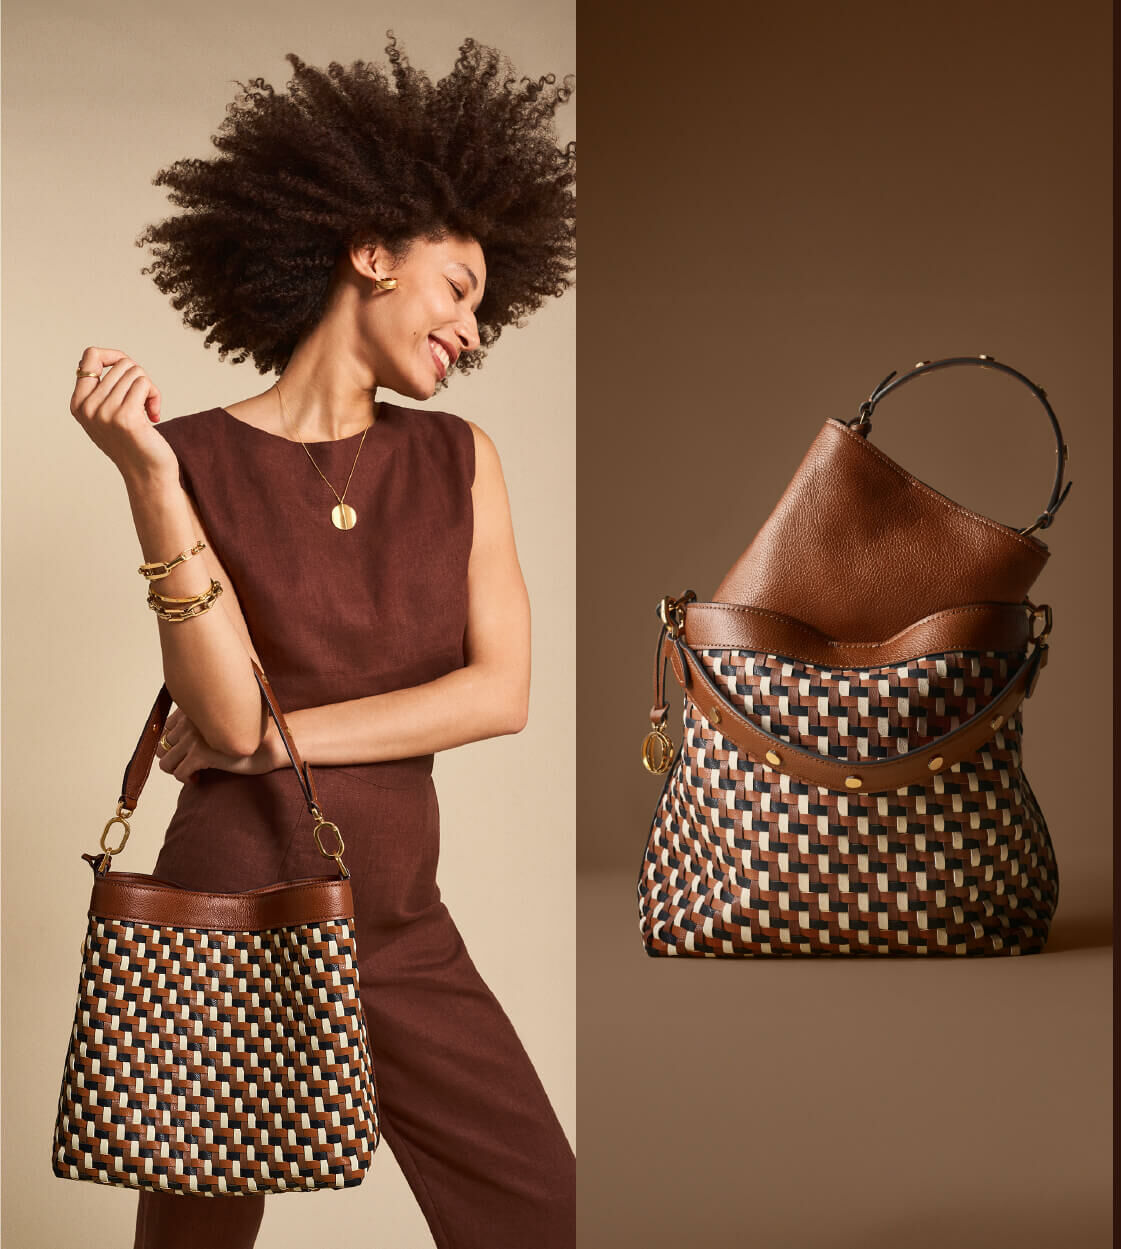 A woman in a brown outfit carrying the woven, multi-colored Jessie Bucket bag. The woven multi-colored Jessie Bucket bag with a smaller brown leather Jessie Bucket bag resting inside of it.